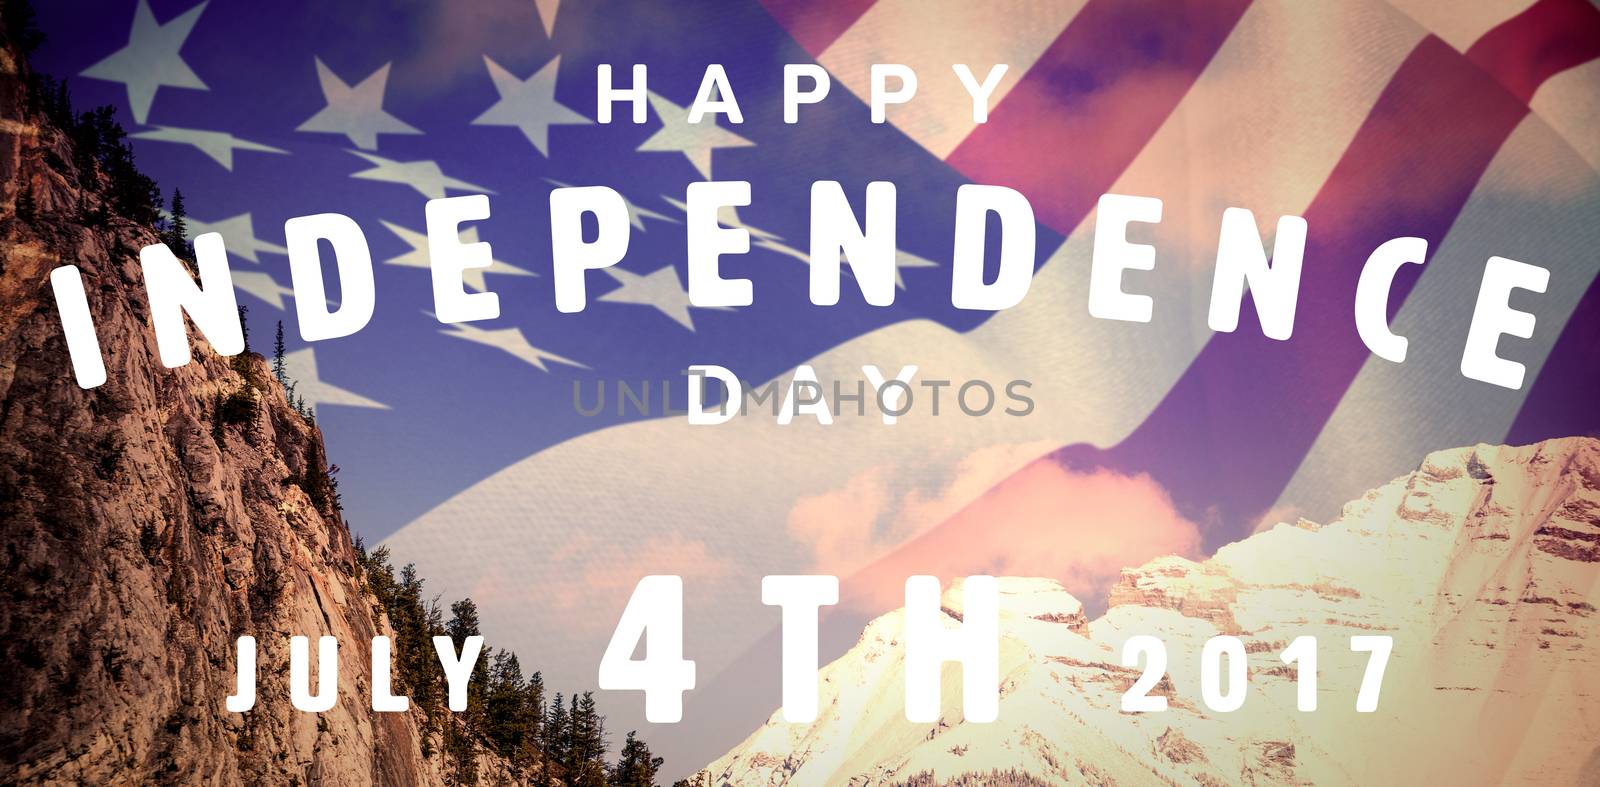 Composite image of happy 4th of july text on white background by Wavebreakmedia